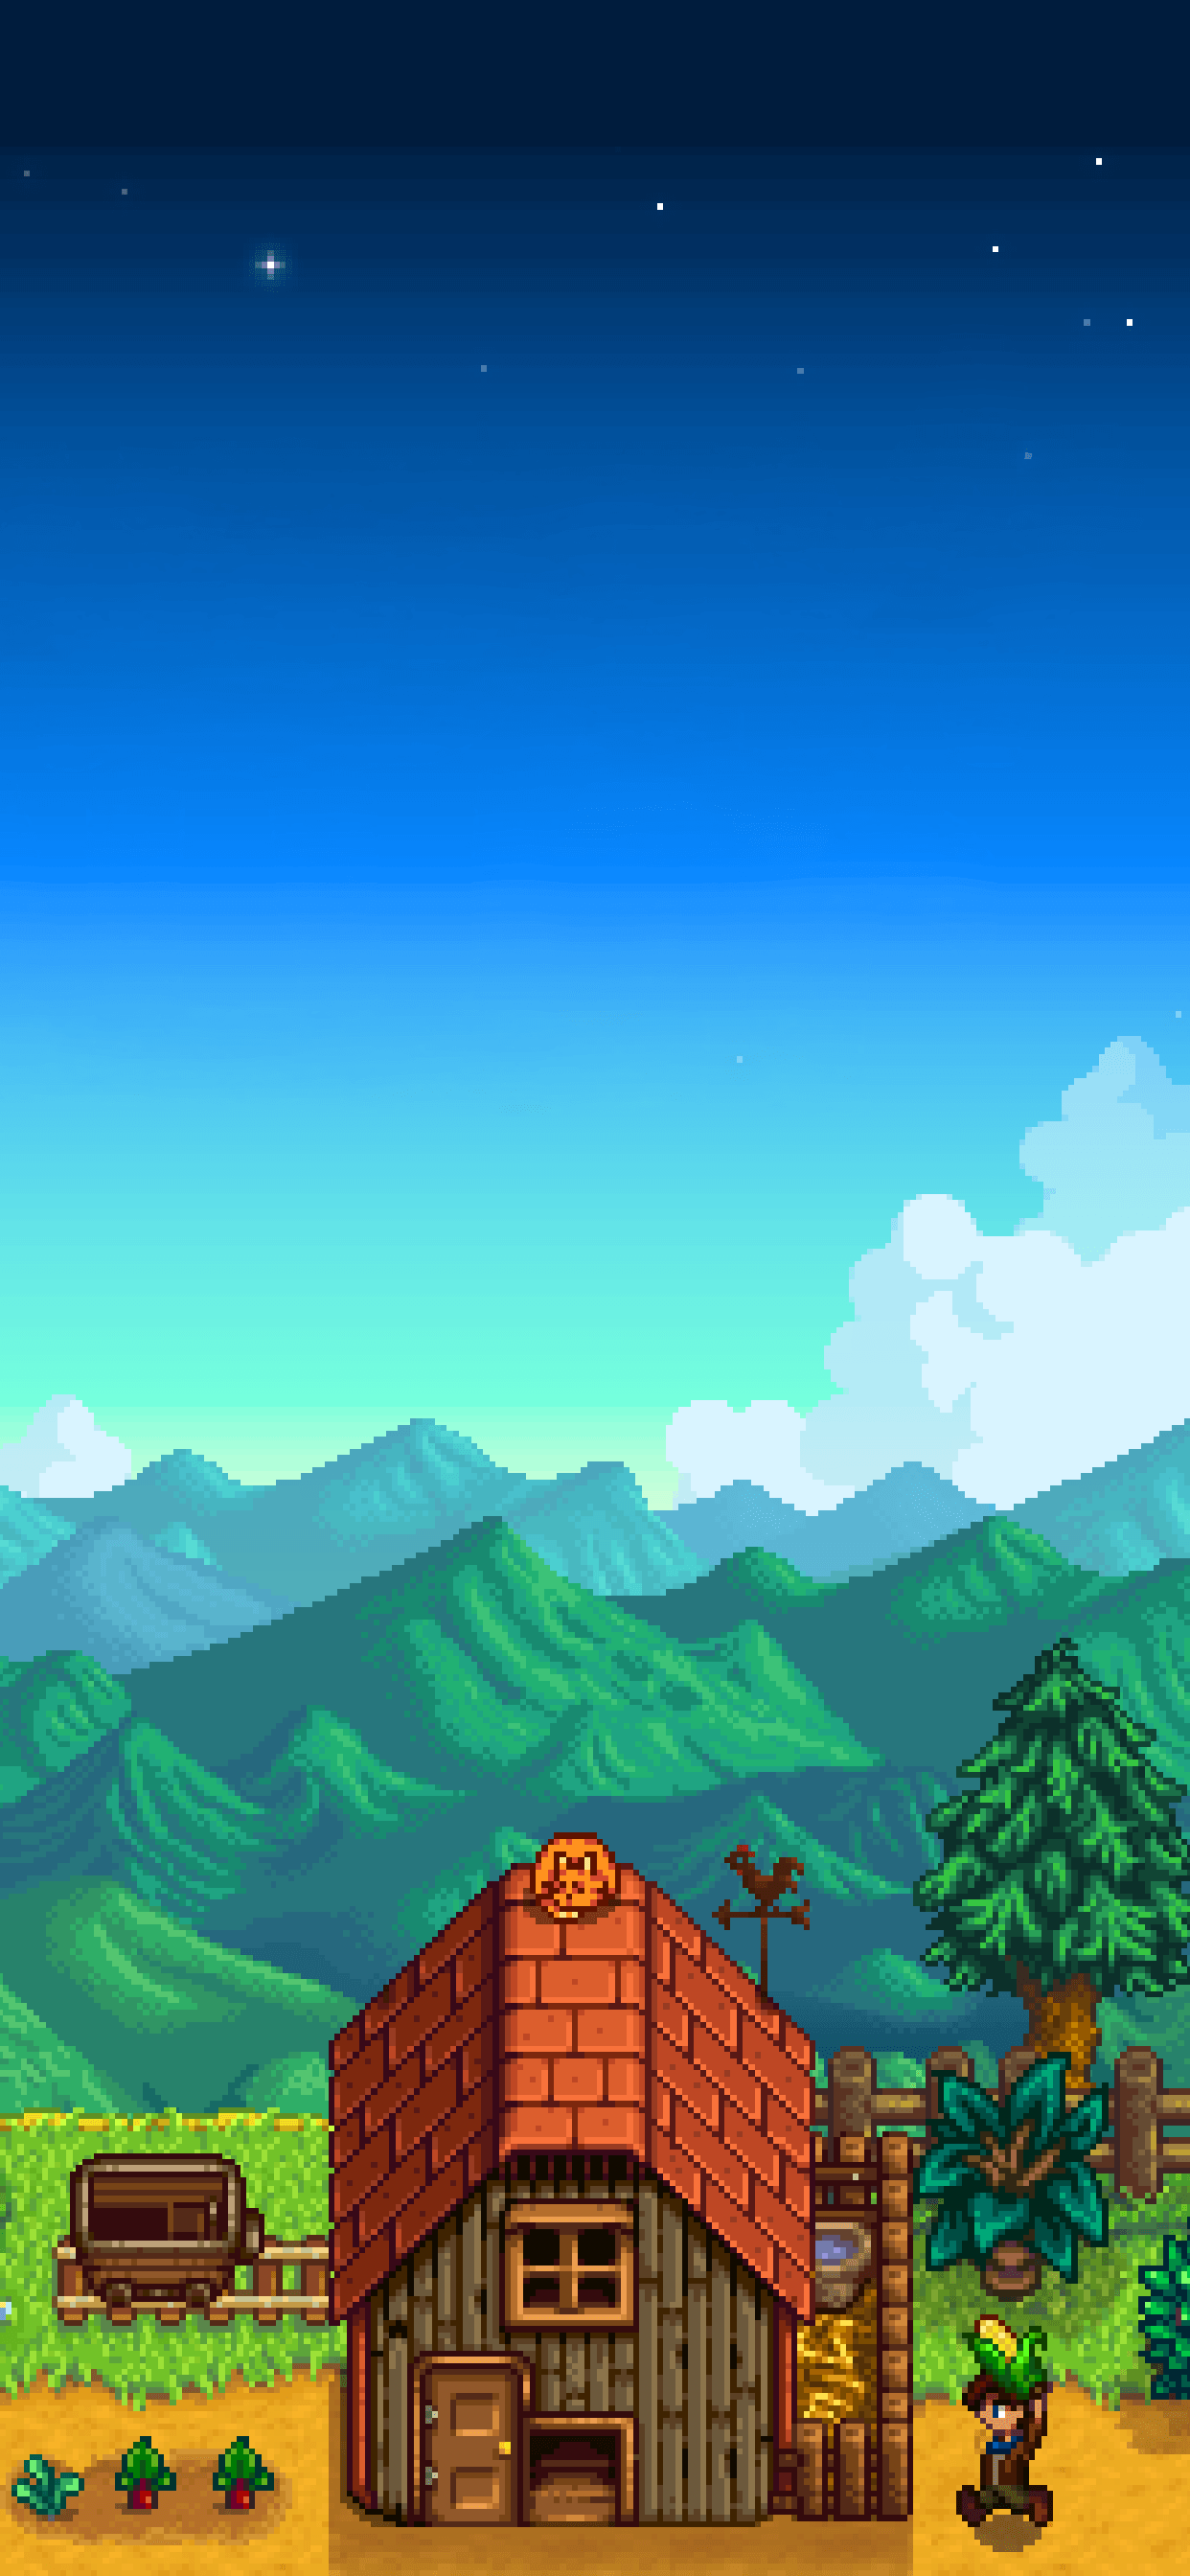 Stardew ValleyFind gorgeous wallpaper for your shiny new iPhone X